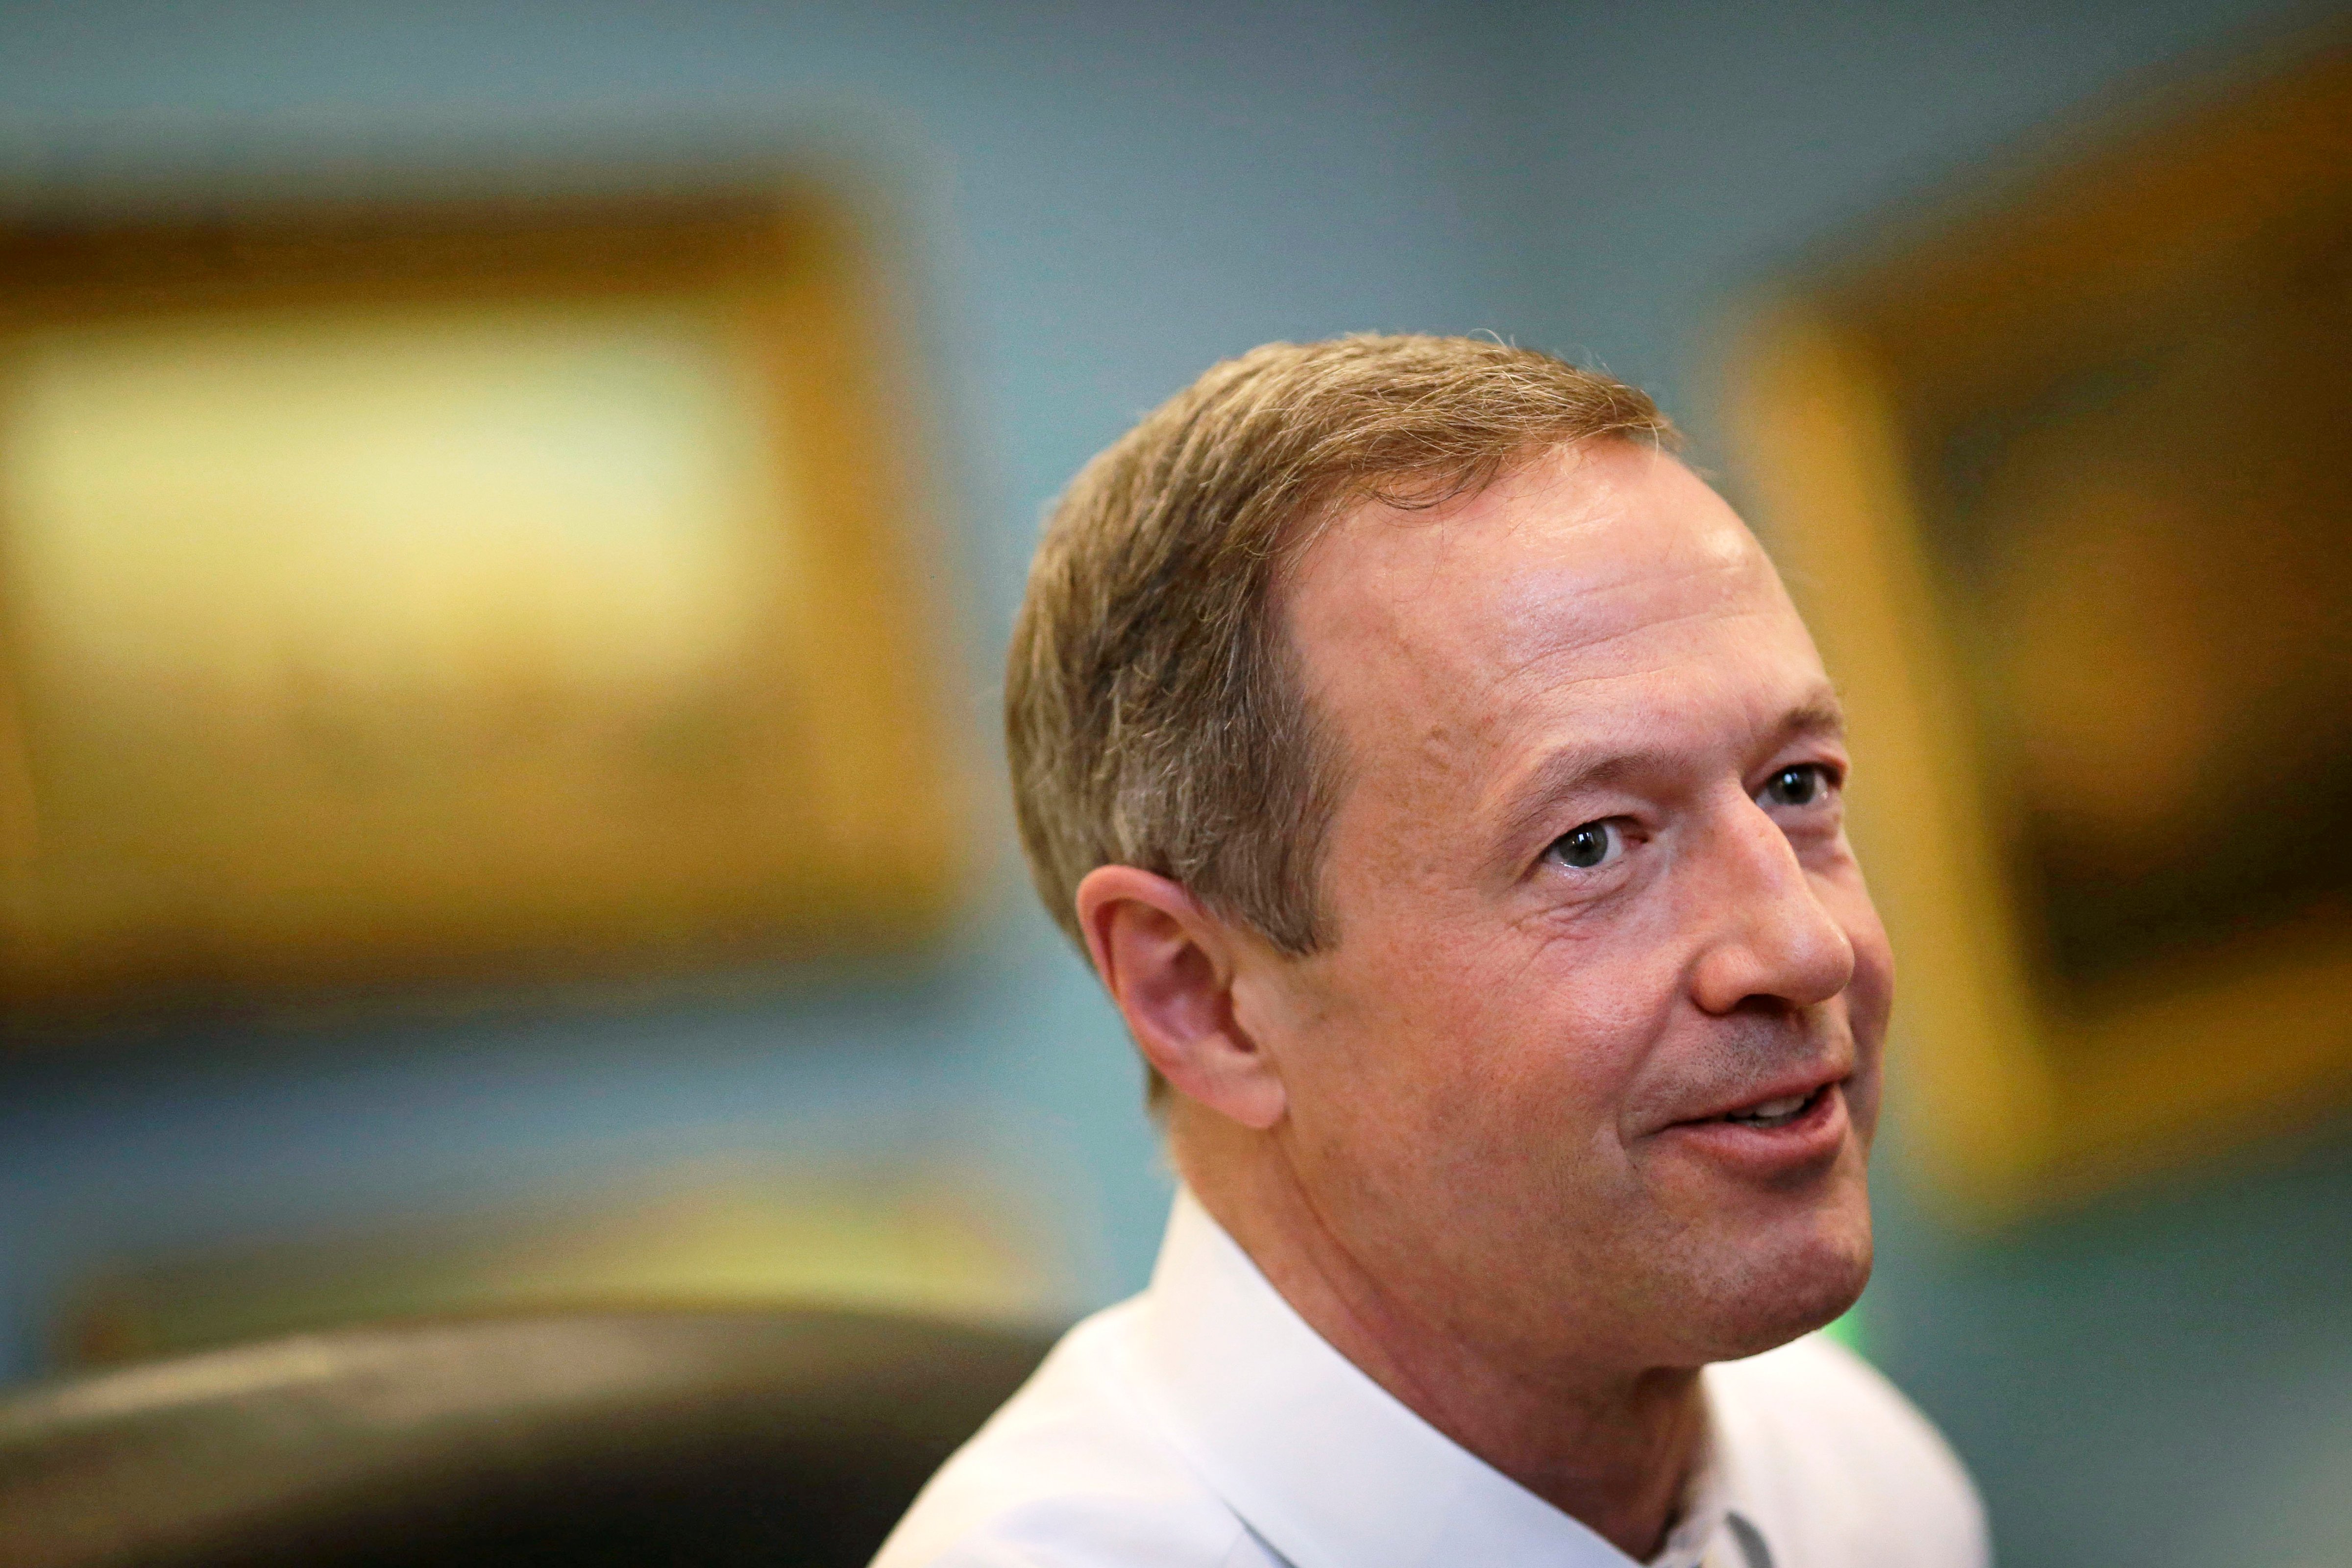 Maryland Governor Martin O'Malley speaks with reporters in his office inside the Maryland State House in Annapolis, Md., on April 7, 2014. (Patrick Semansky—AP)